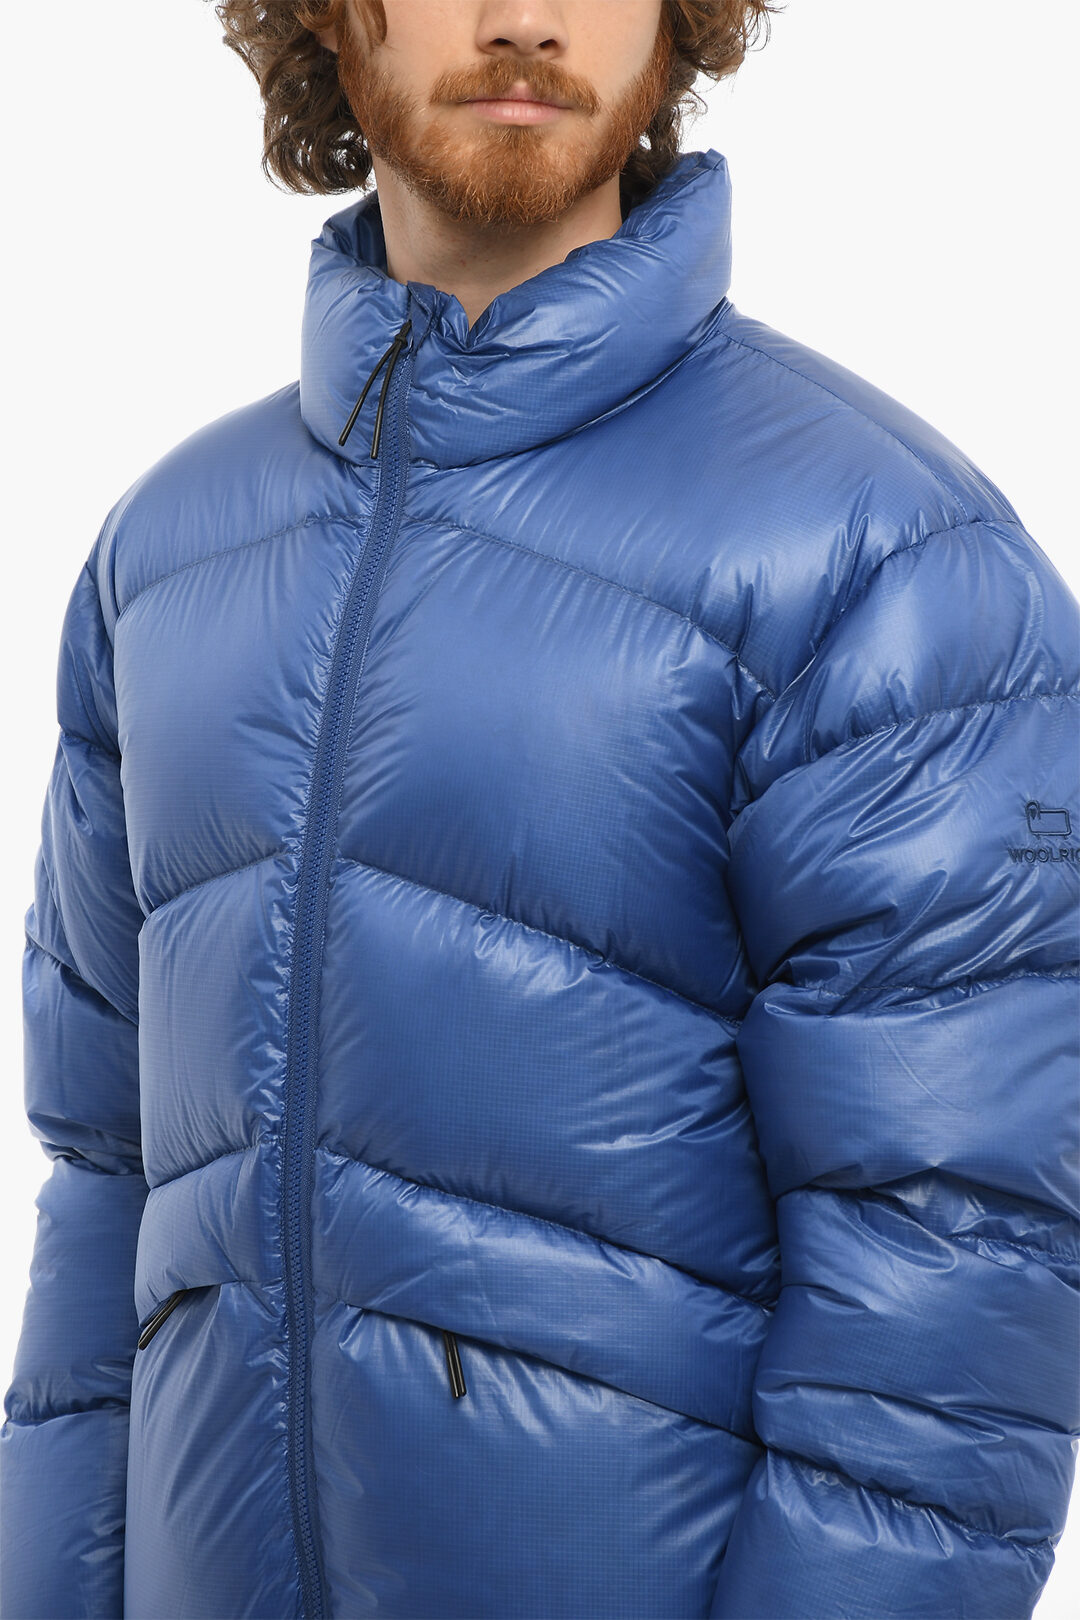 Woolrich Rip Stop Checked POWDER SNOW Down Jacket with 2 Pockets men ...